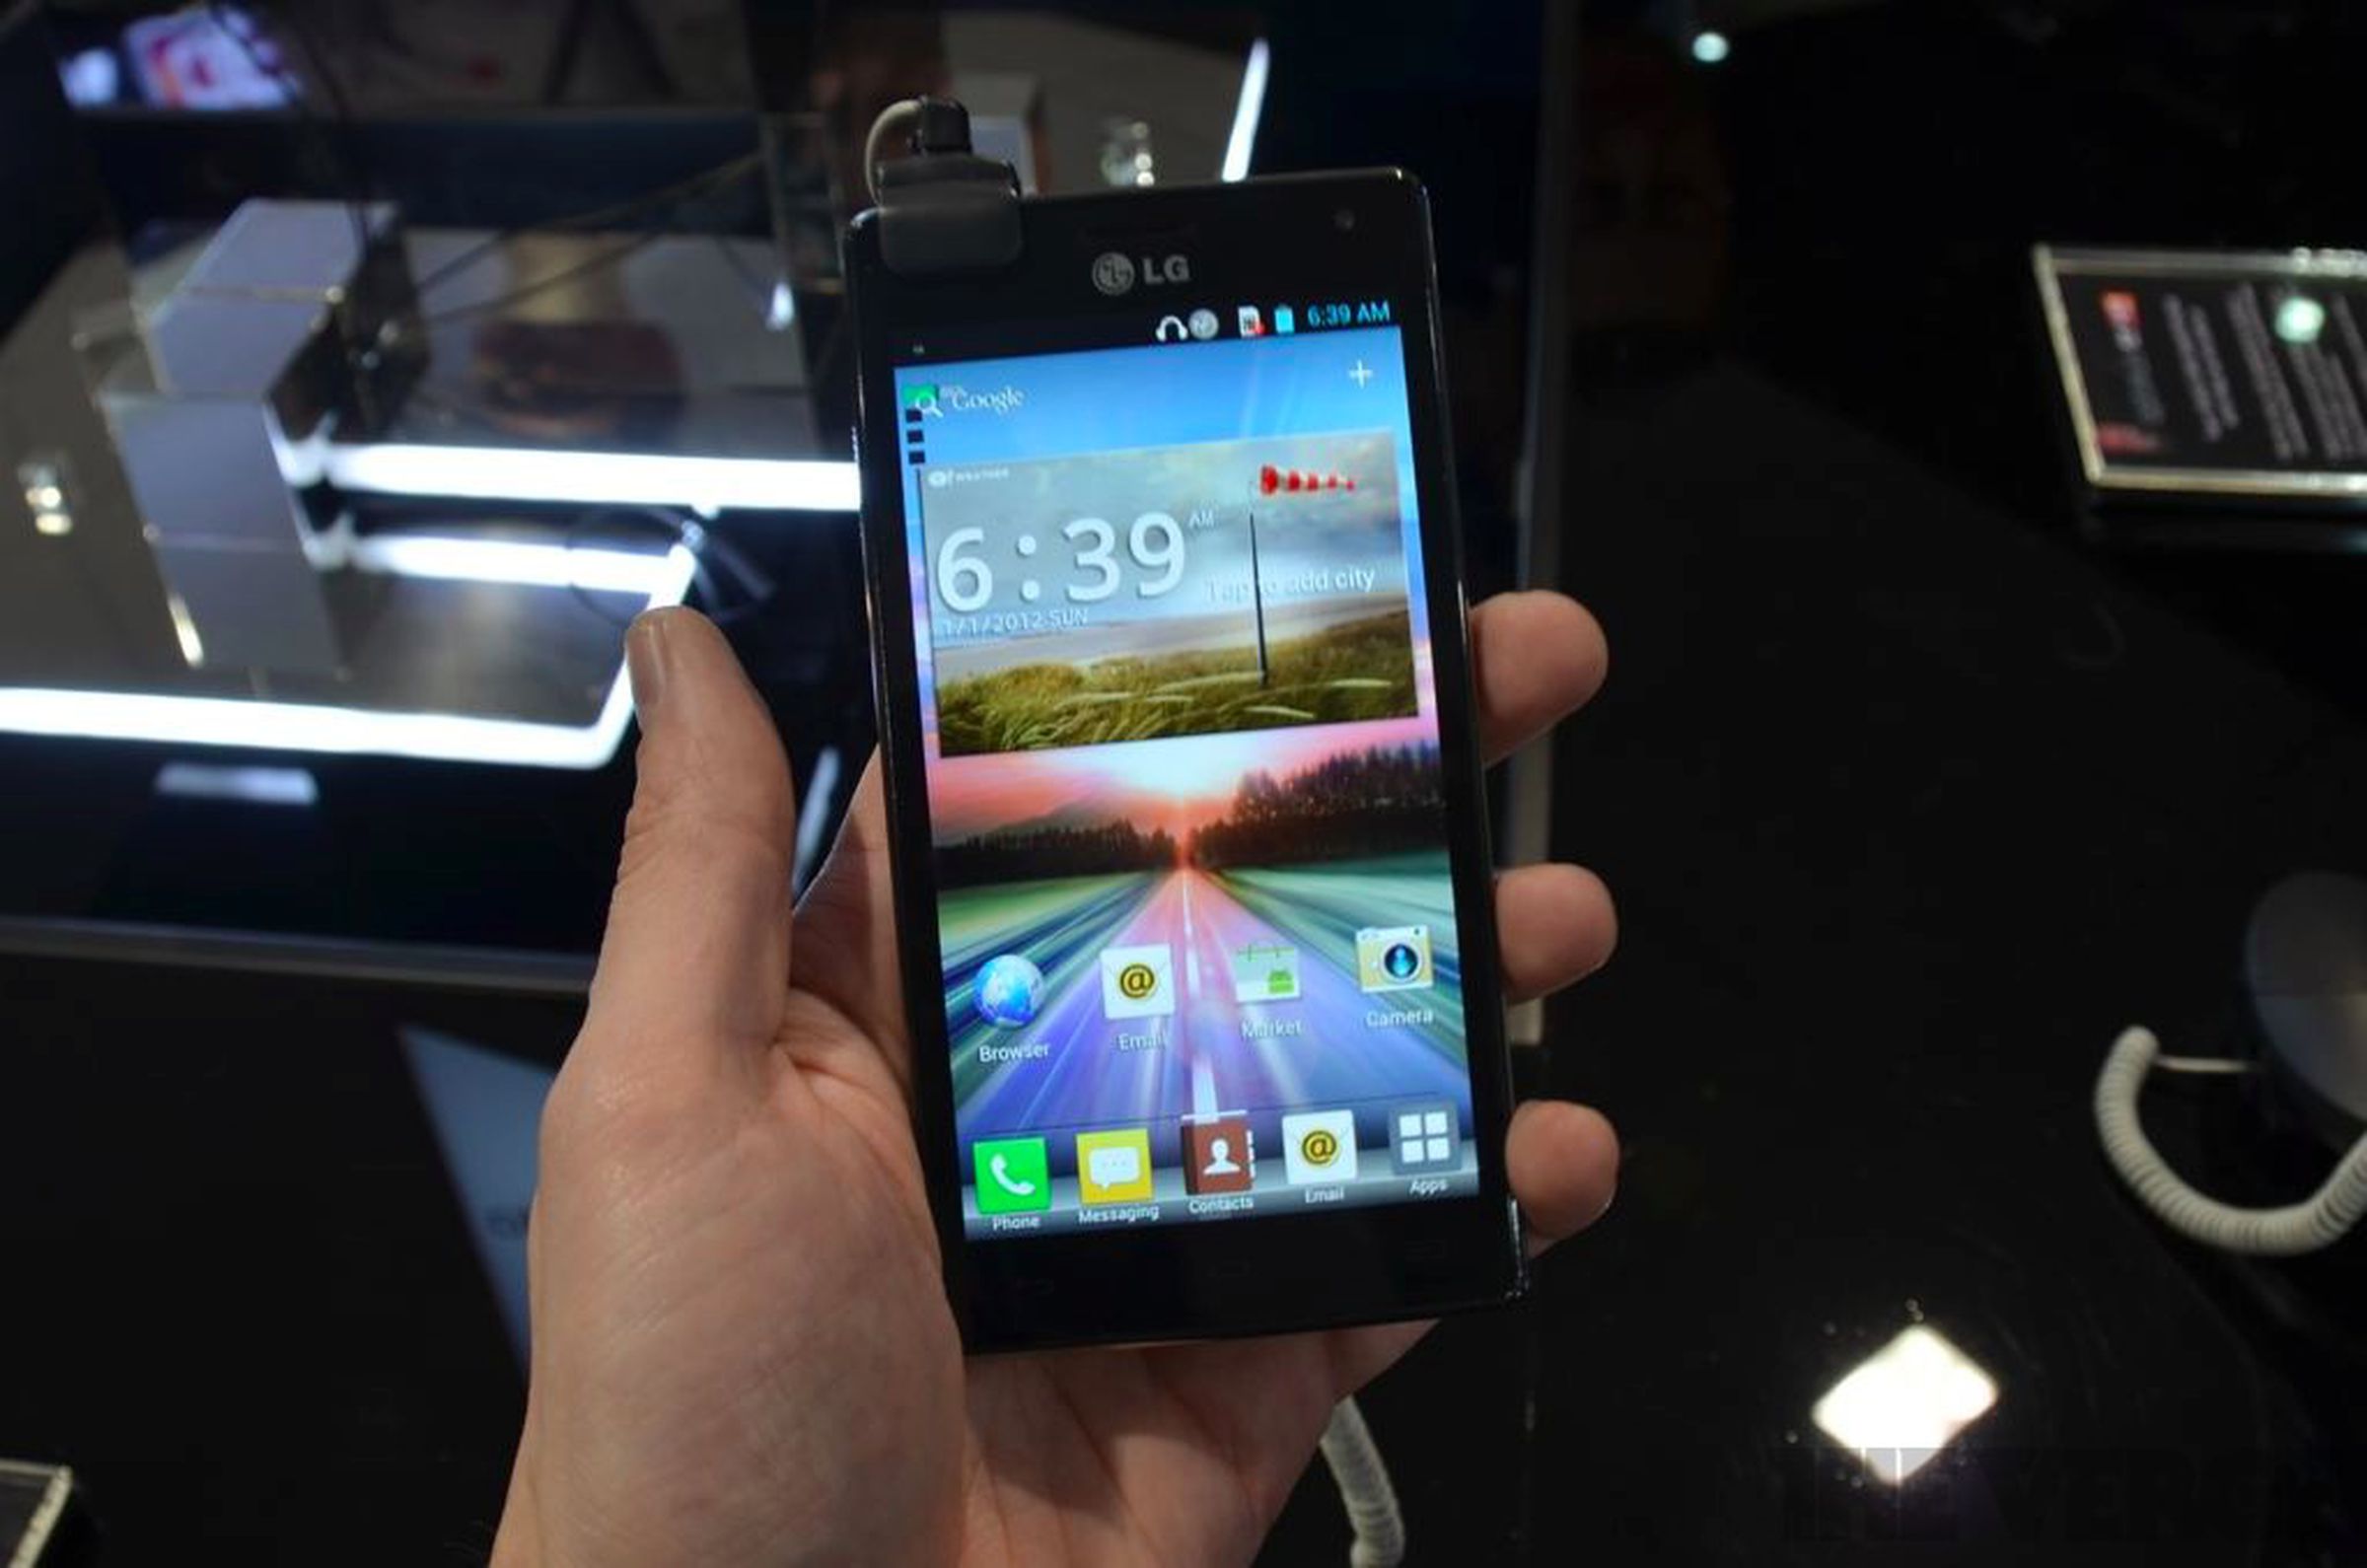 LG Optimus 4X HD Hands On Pictures